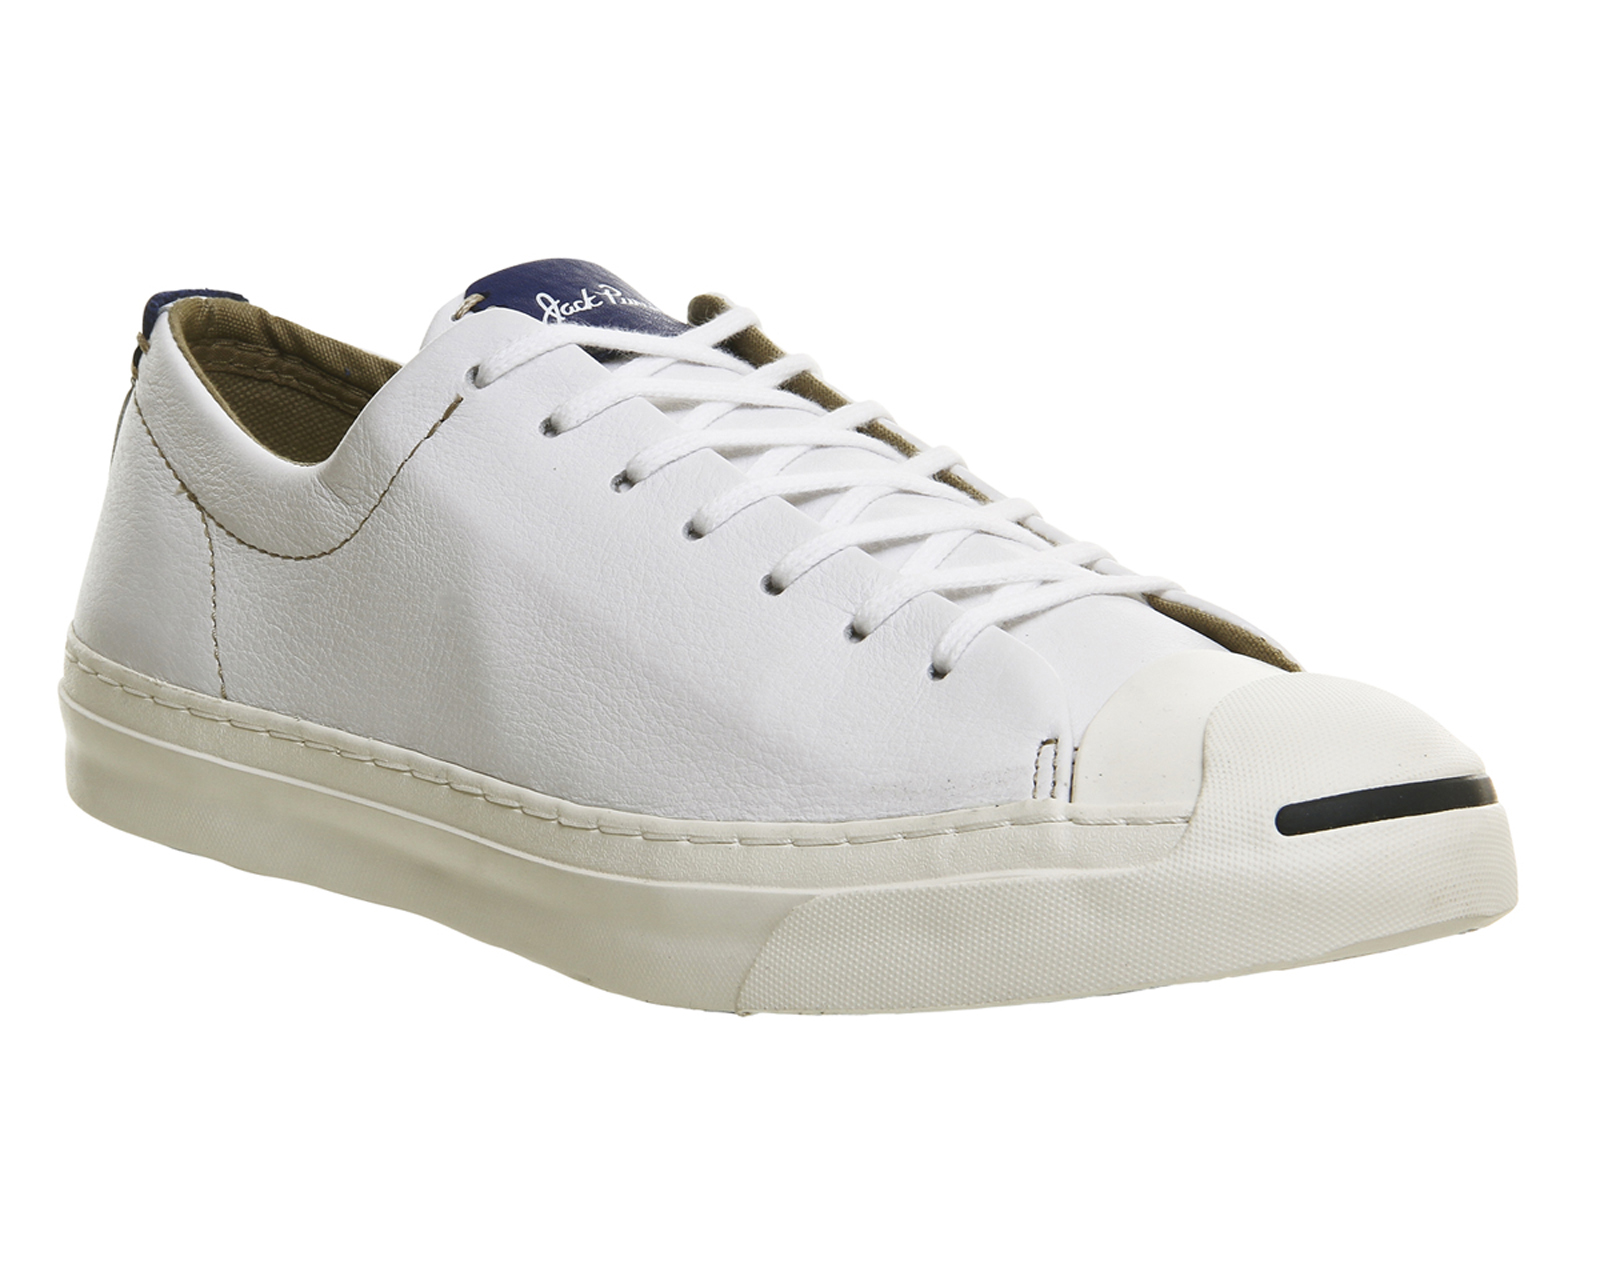 Converse Jack Purcell Jack Purcell Jack White Egret Road Trip Blue ...